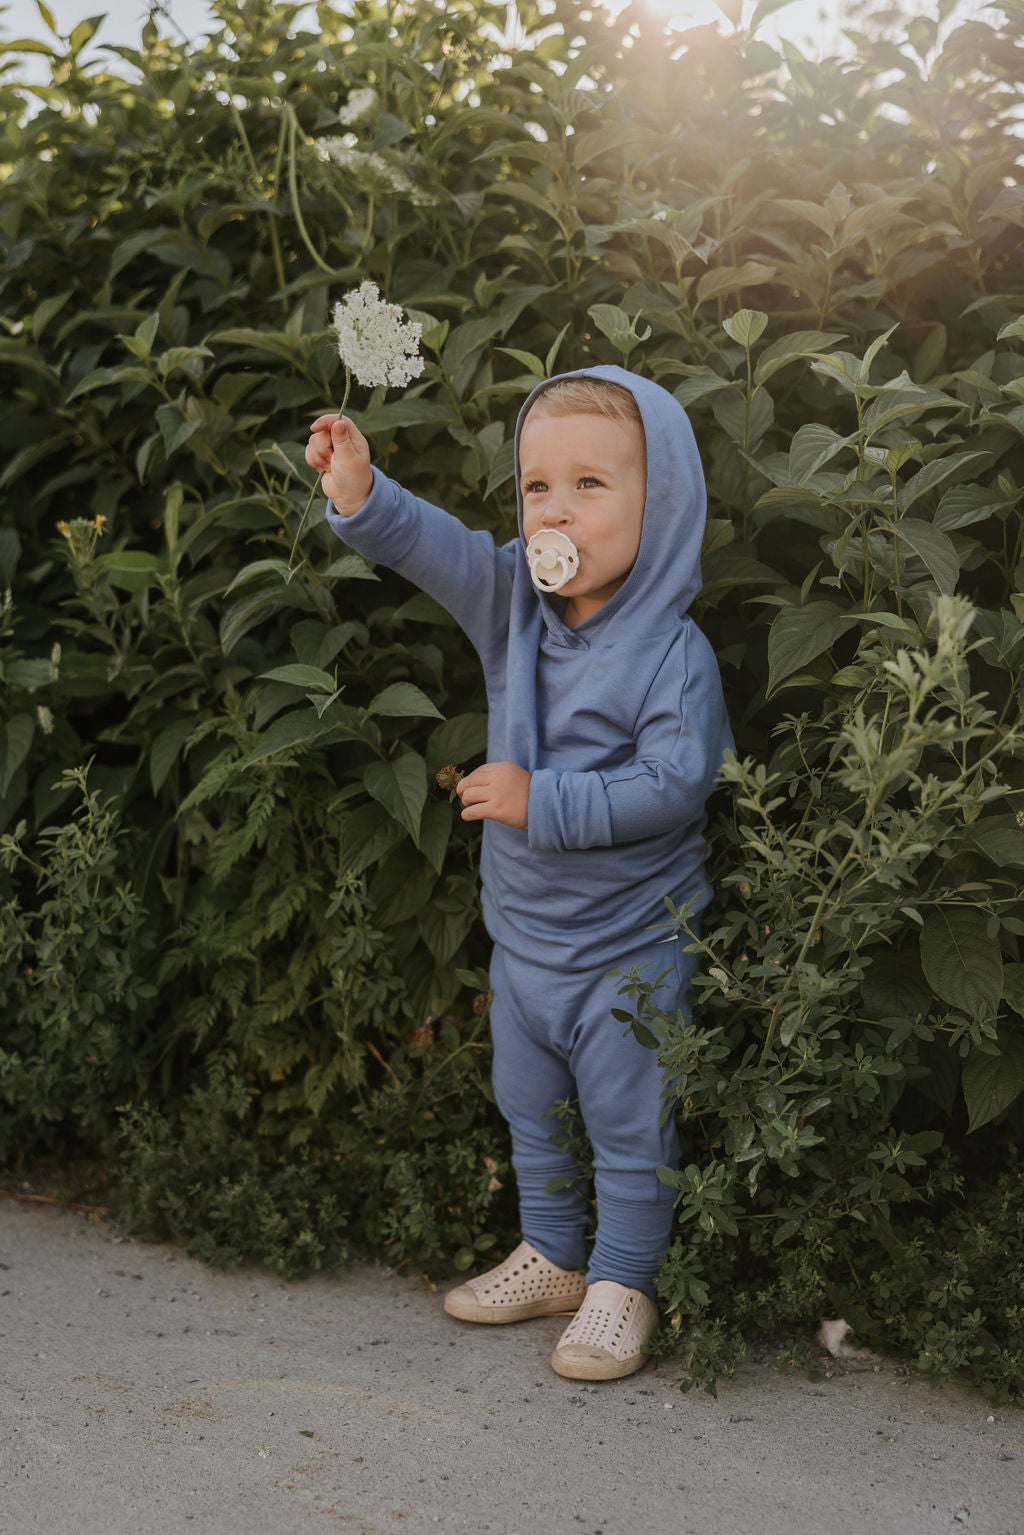 Grow With Me Hoodie | Bluebell